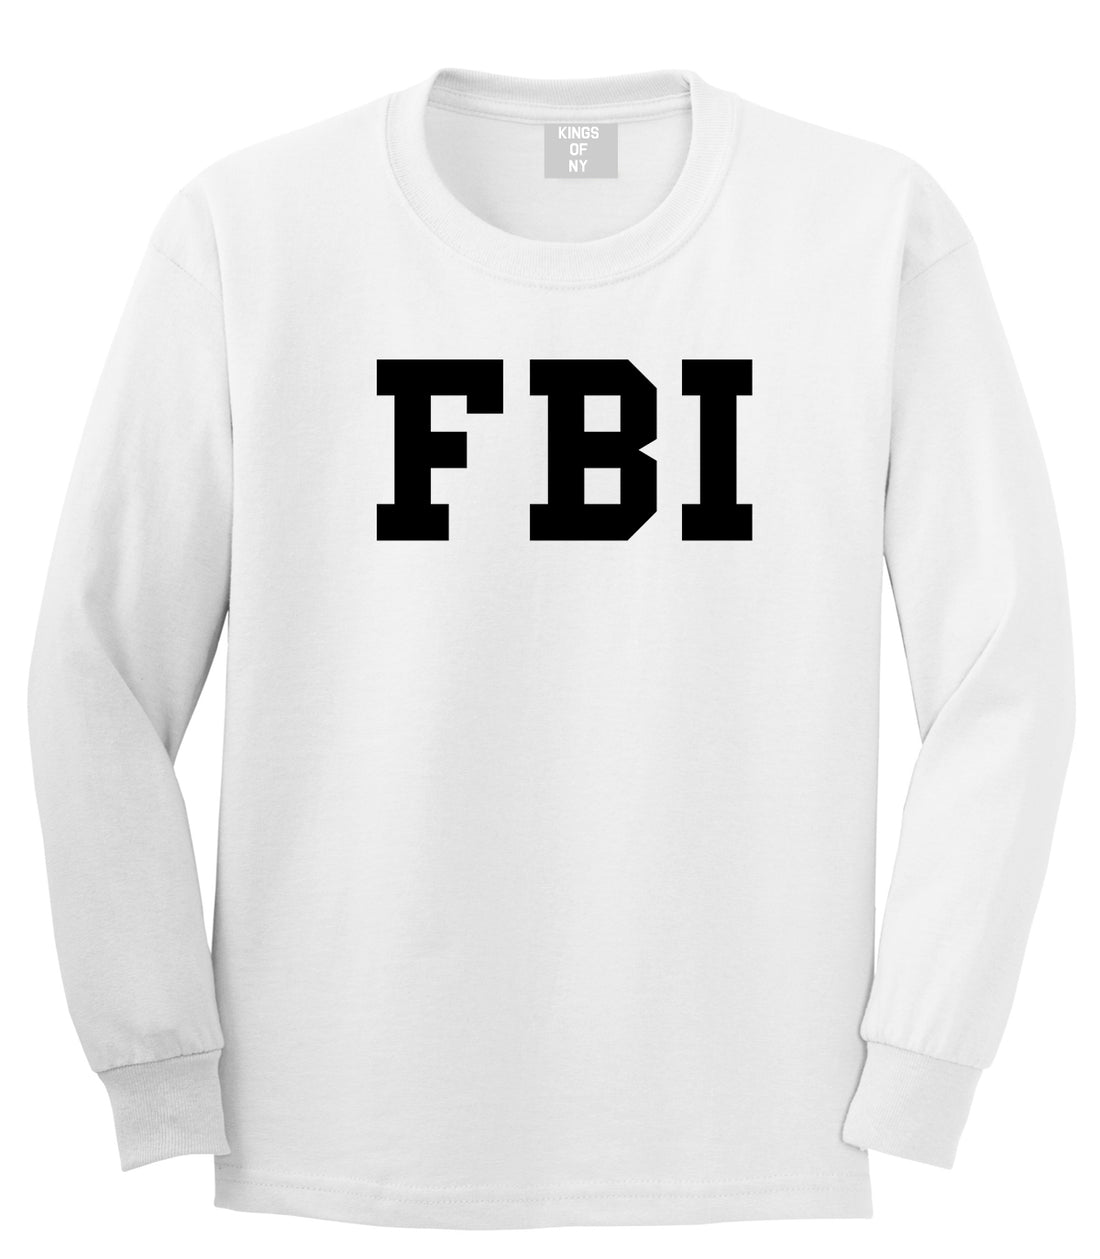 FBI Law Enforcement Mens White Long Sleeve T-Shirt by KINGS OF NY